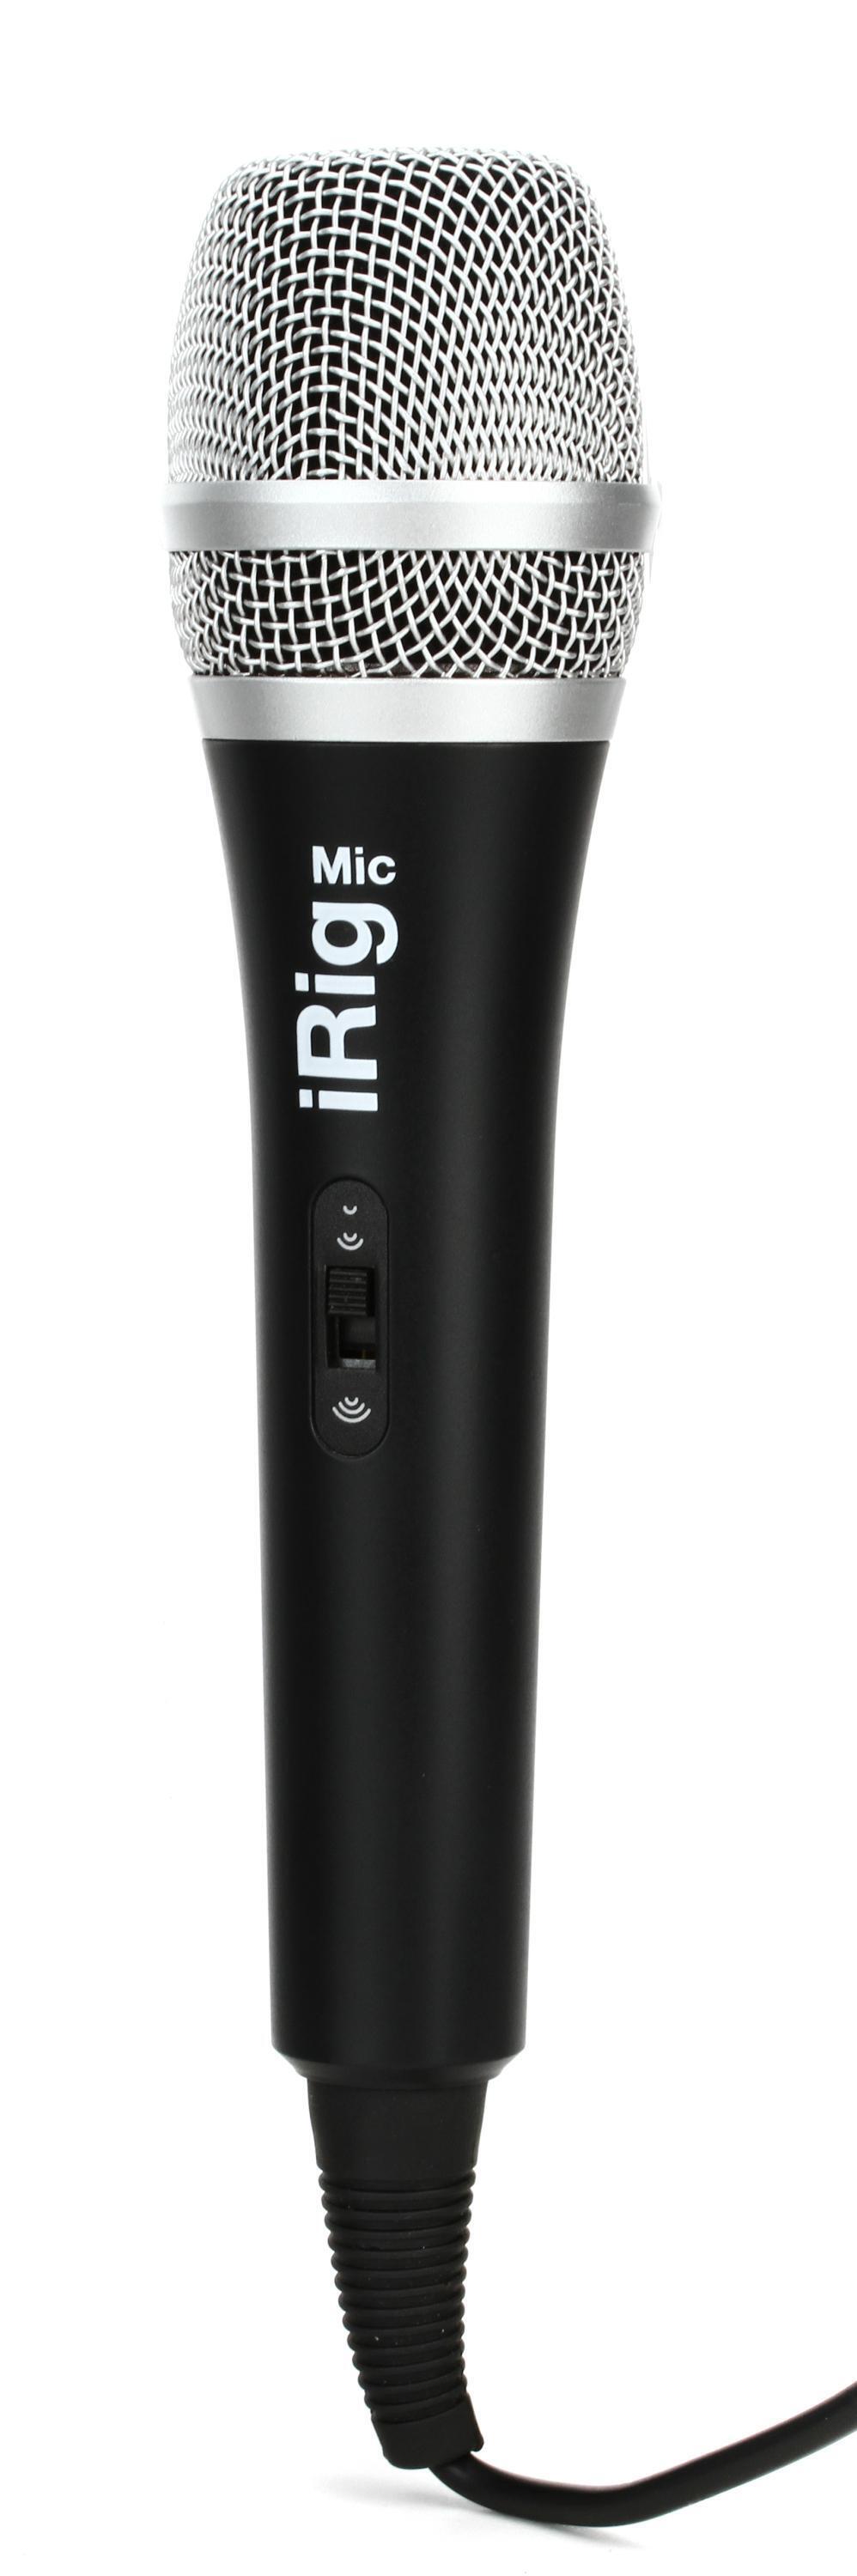 Ik Multimedia Irig Mic Handheld Condenser Microphone for iPhone, iPod  touch, iPad, and Android Devices